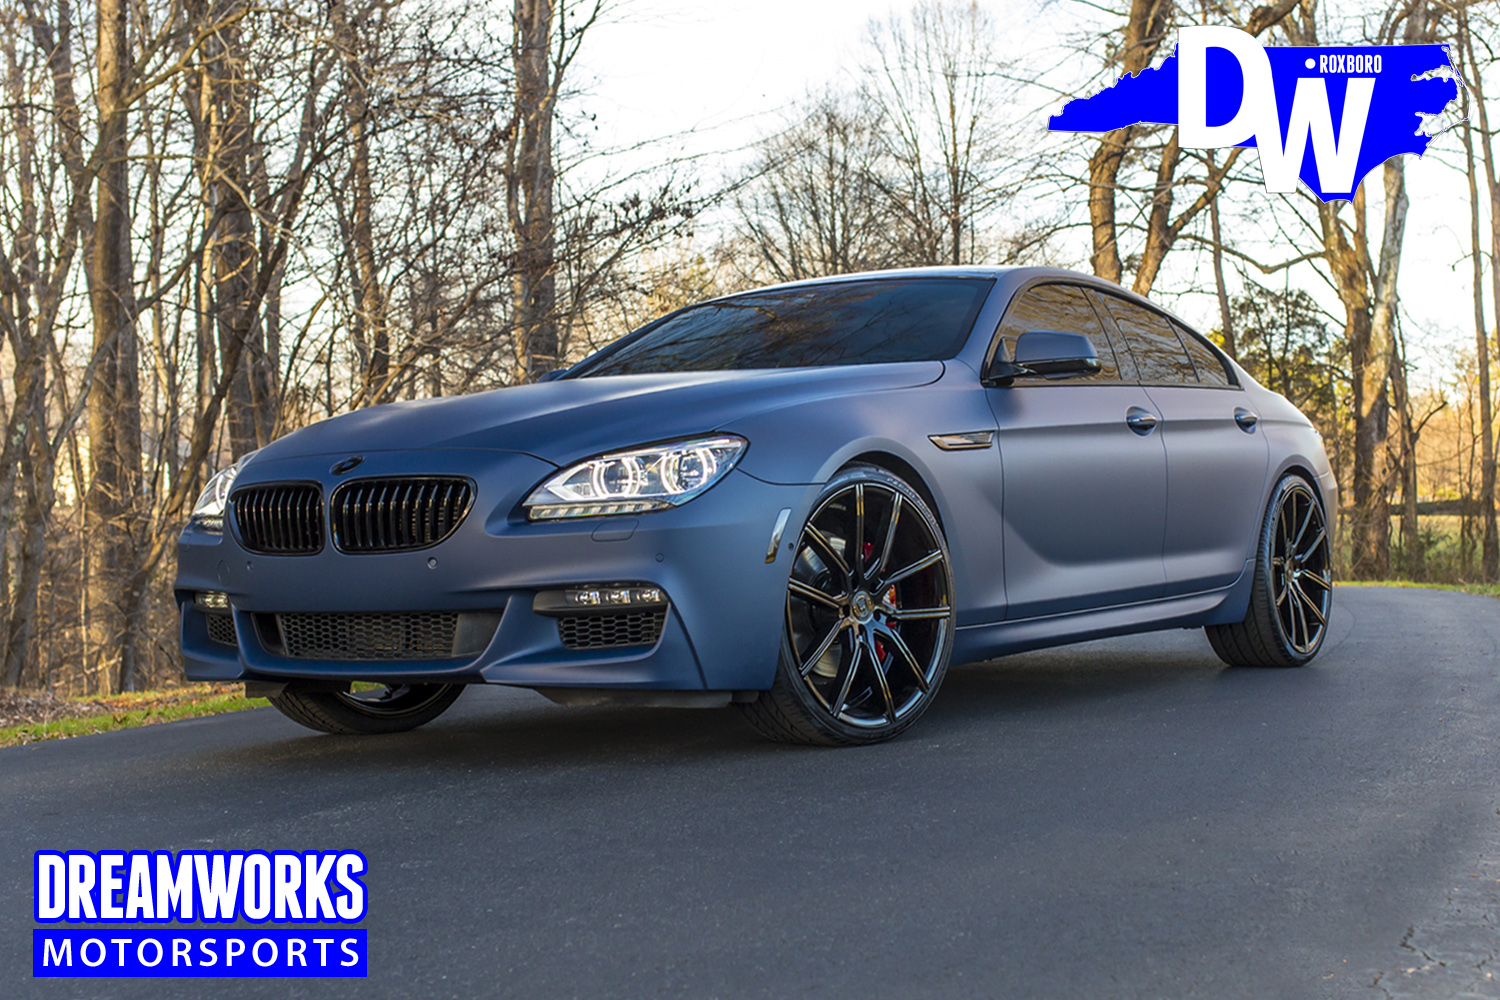 BMW_650_Matte_Indego_Blue_Painted_Accents_By_Dreamworks_Motorsports-10.jpg